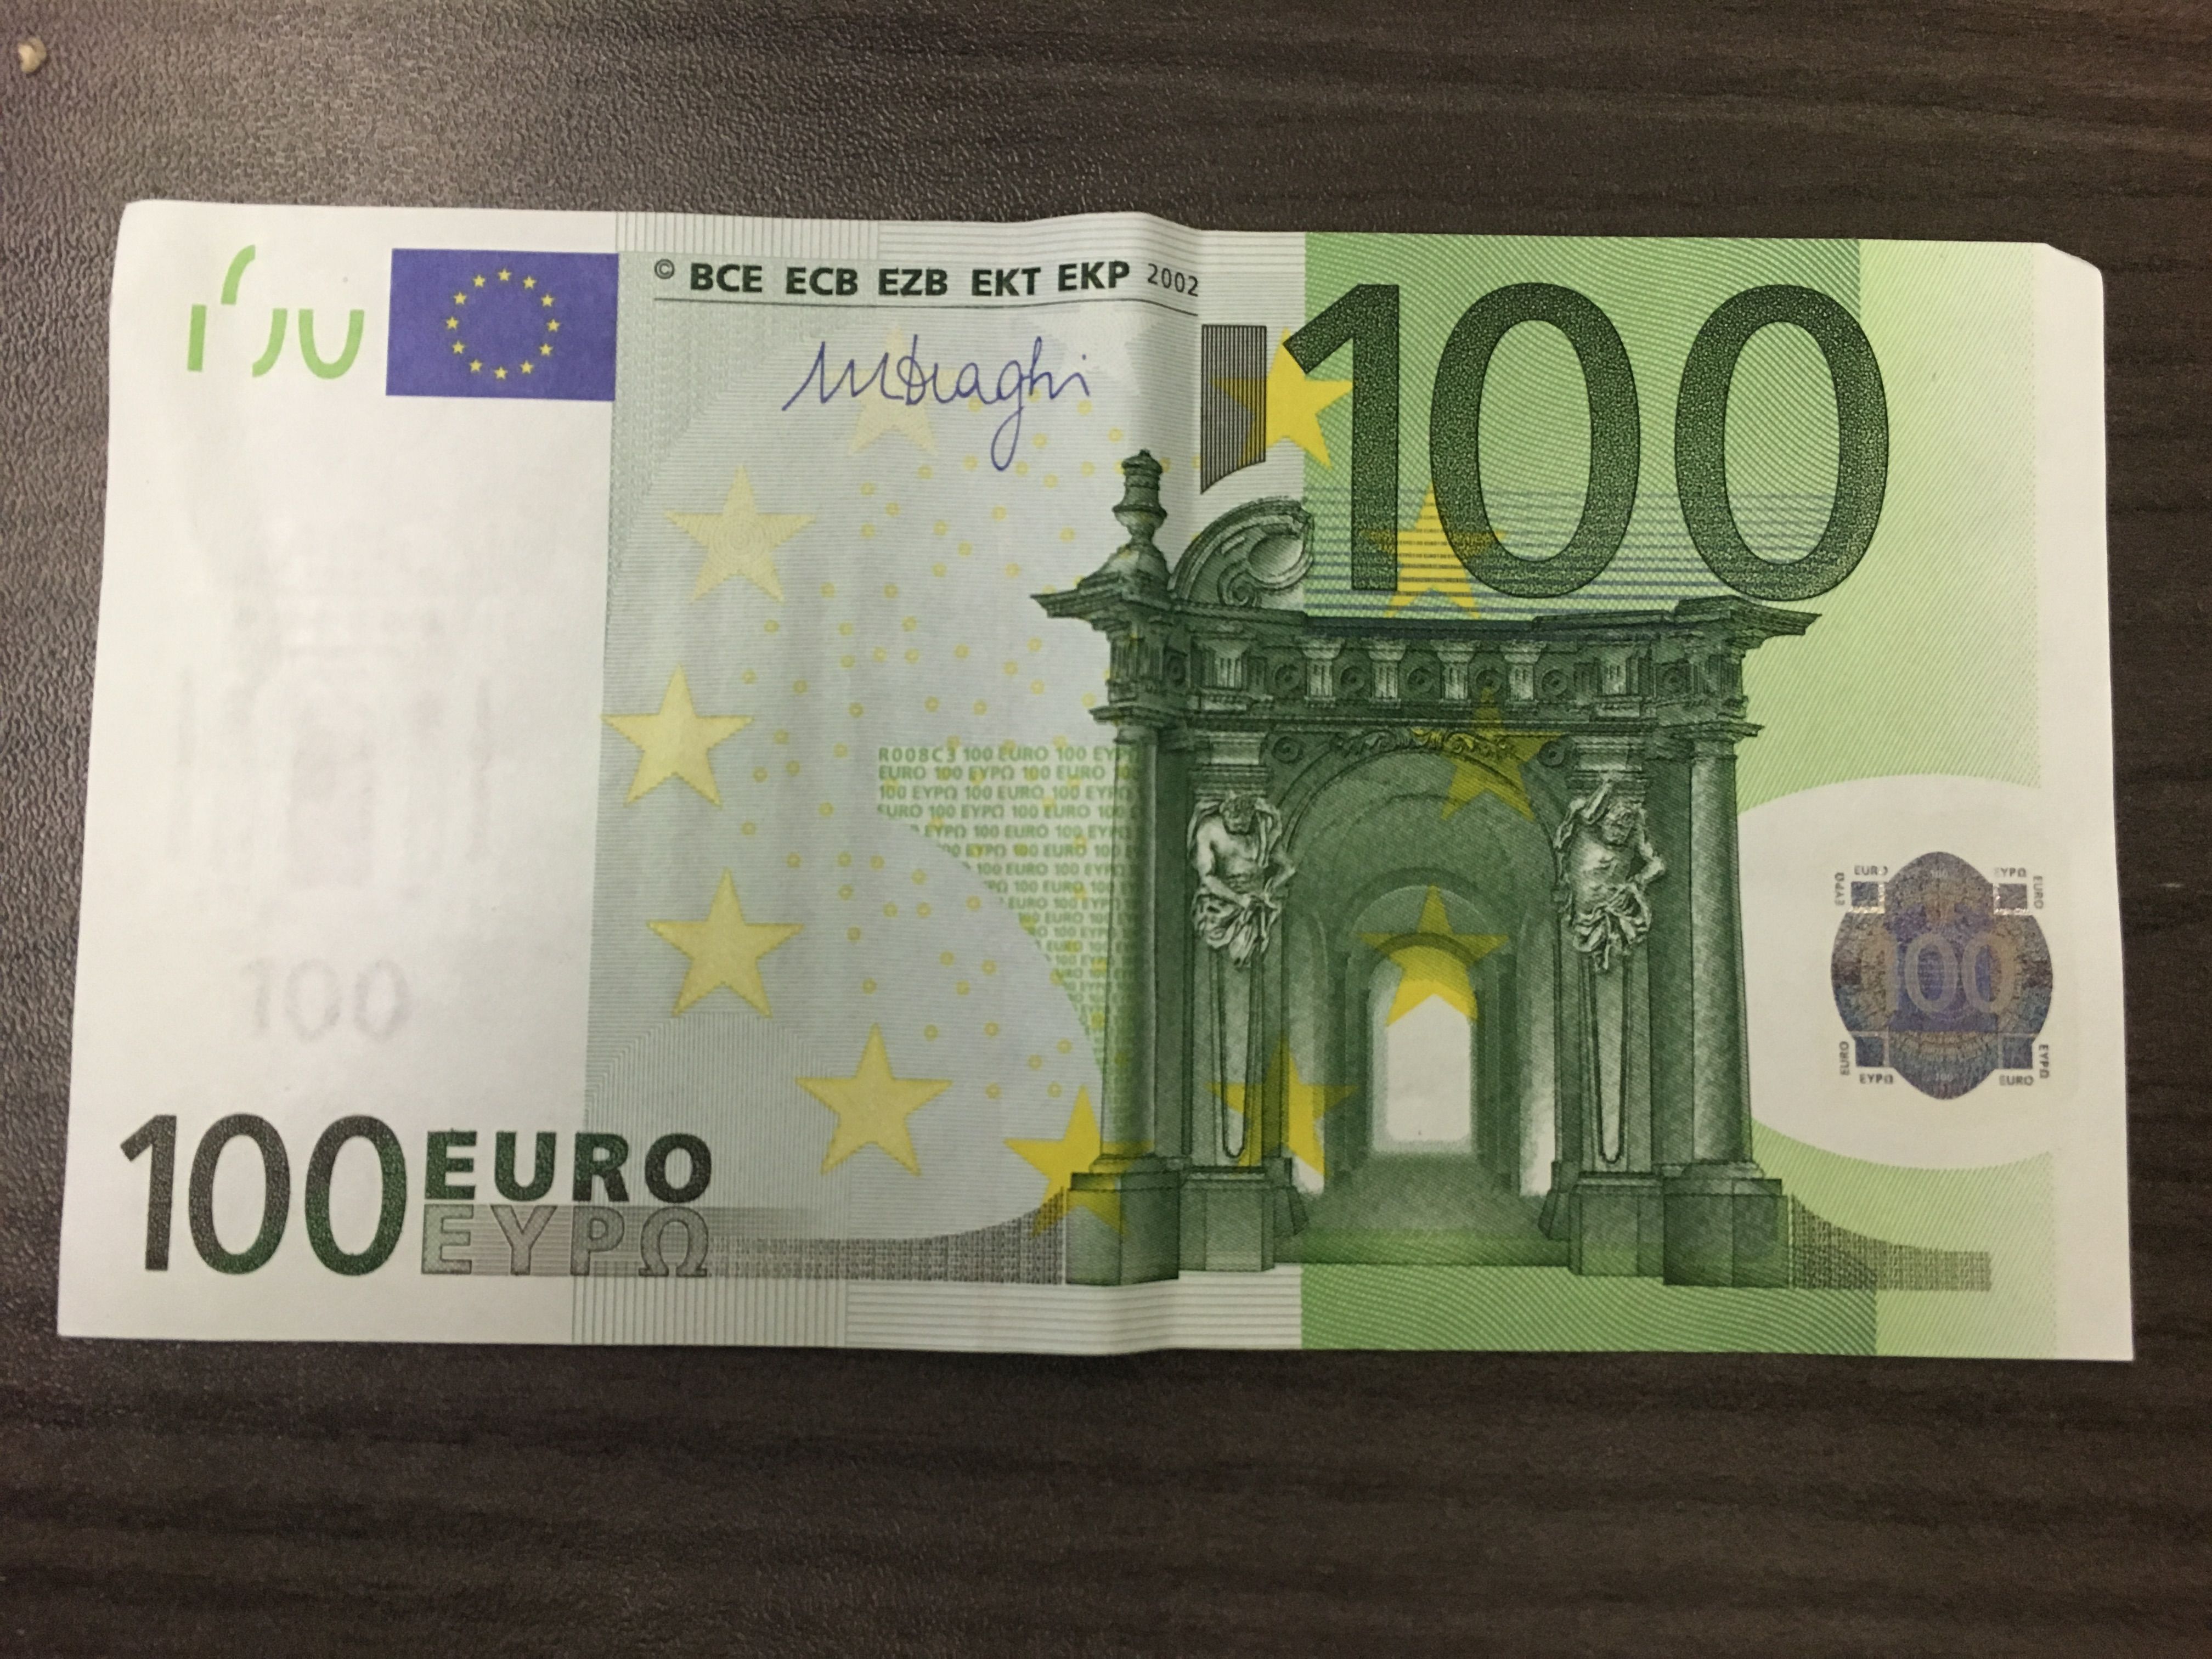 The 100 euro note reflects the Baroque era which succeeded the ...